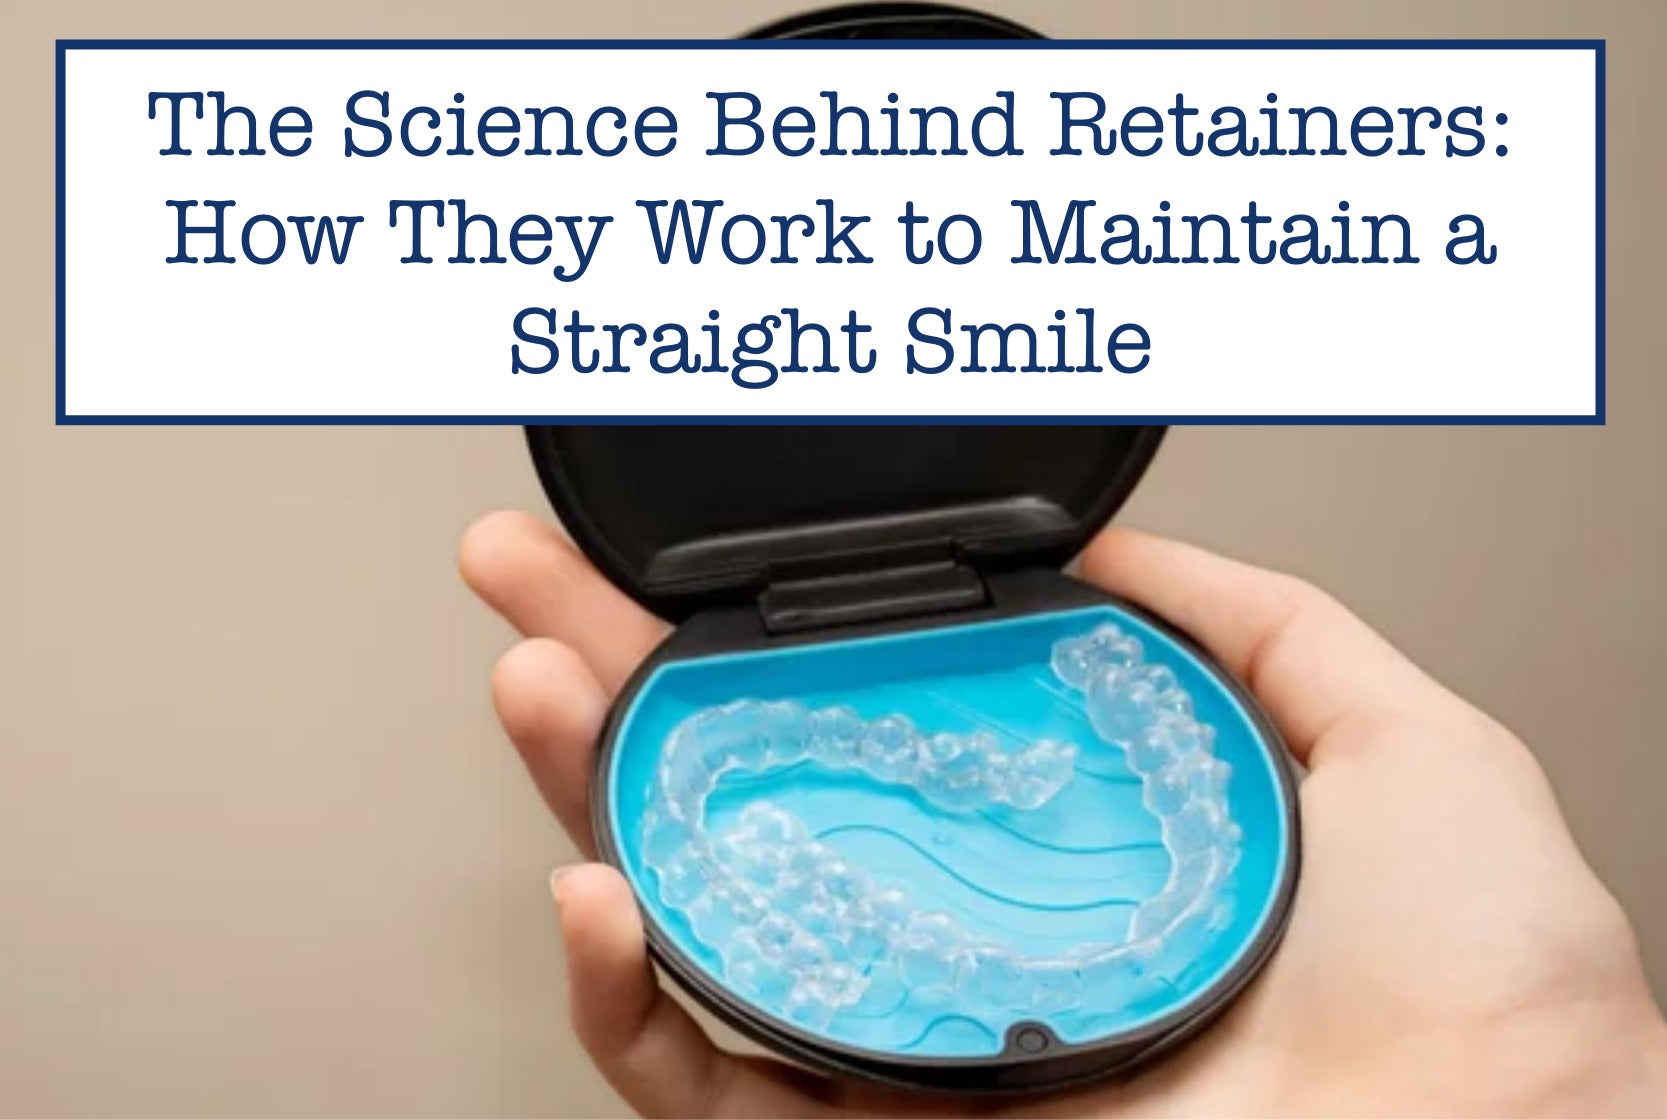 How Do Retainers Work to Maintain a Straight Smile